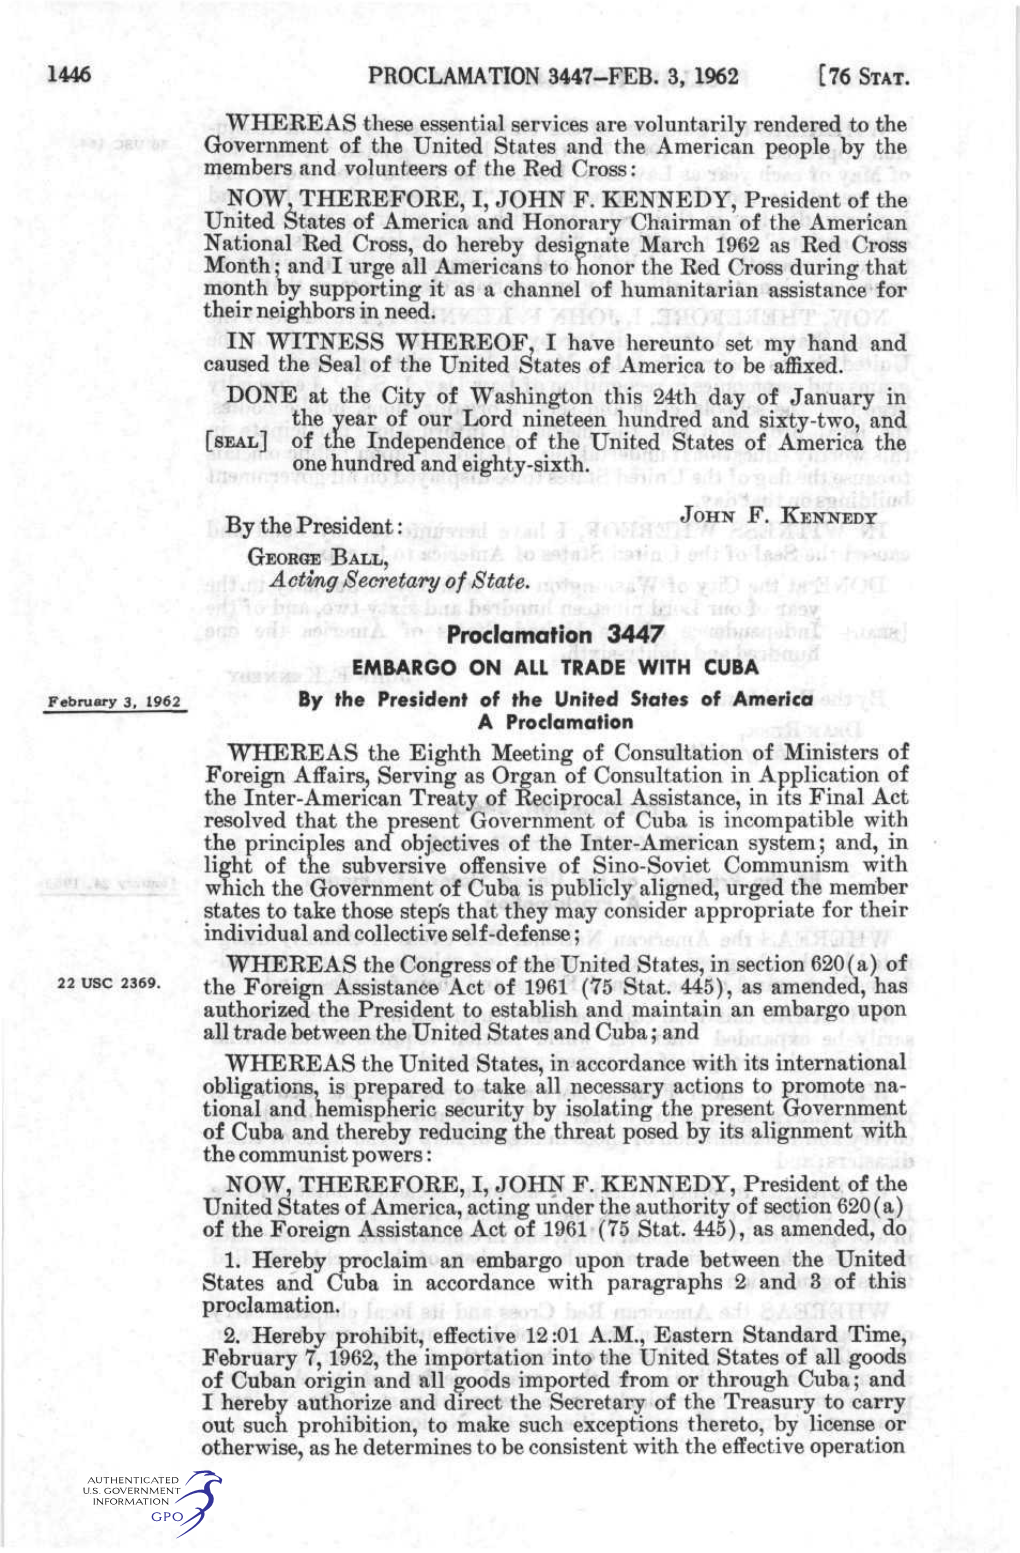 1446 PROCLAMATION 3447-FEB. 3, 1962 WHEREAS These Essential Services Are Voluntarily Rendered to the Government of the United St